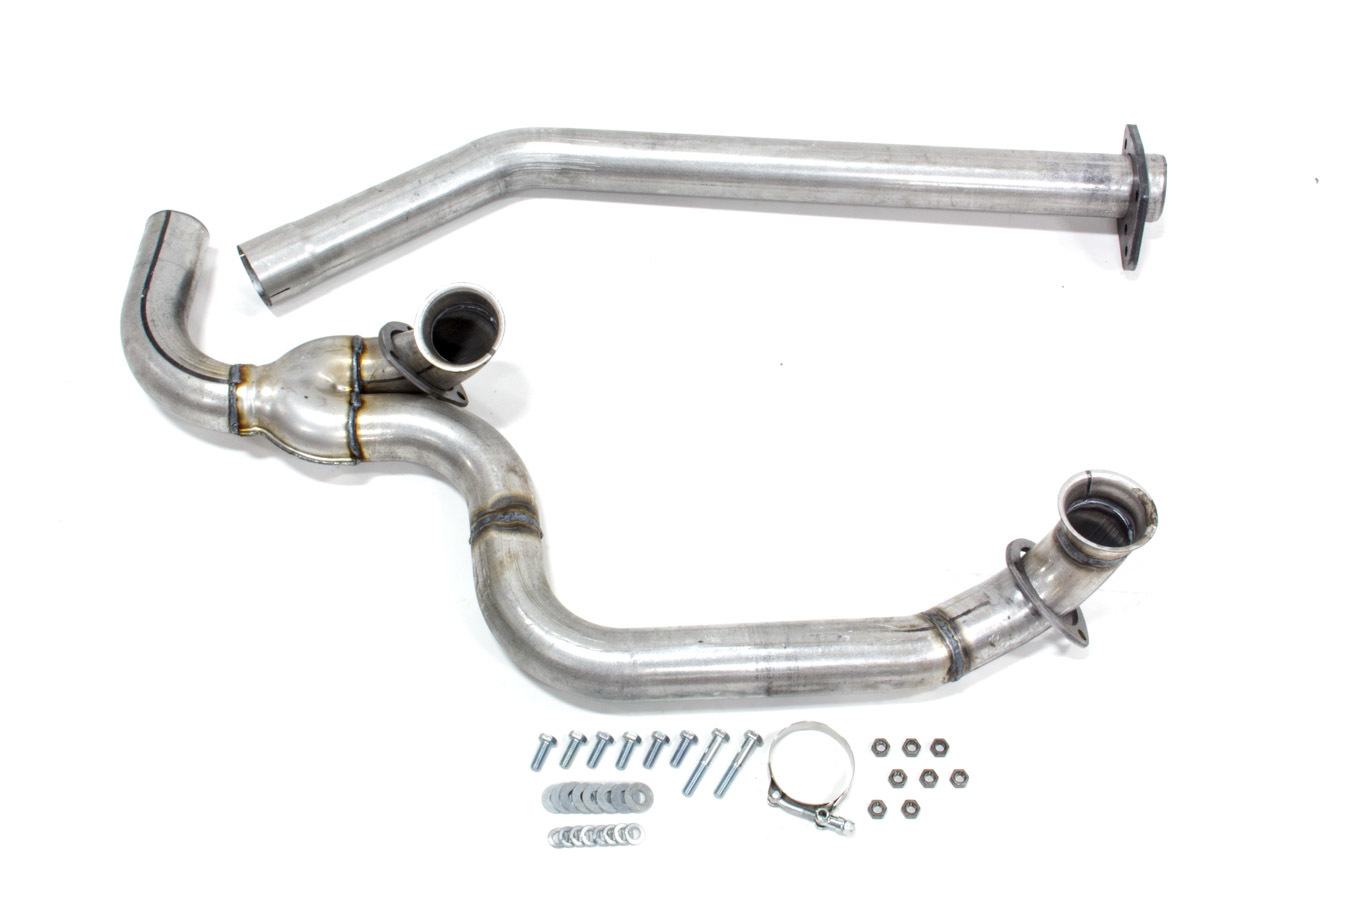 Hooker Headers 16767 Exhaust Y-Pipe, Bolt-On, Steel, Aluminized, Small Block Chevy, GM F-Body 1982-92, Each